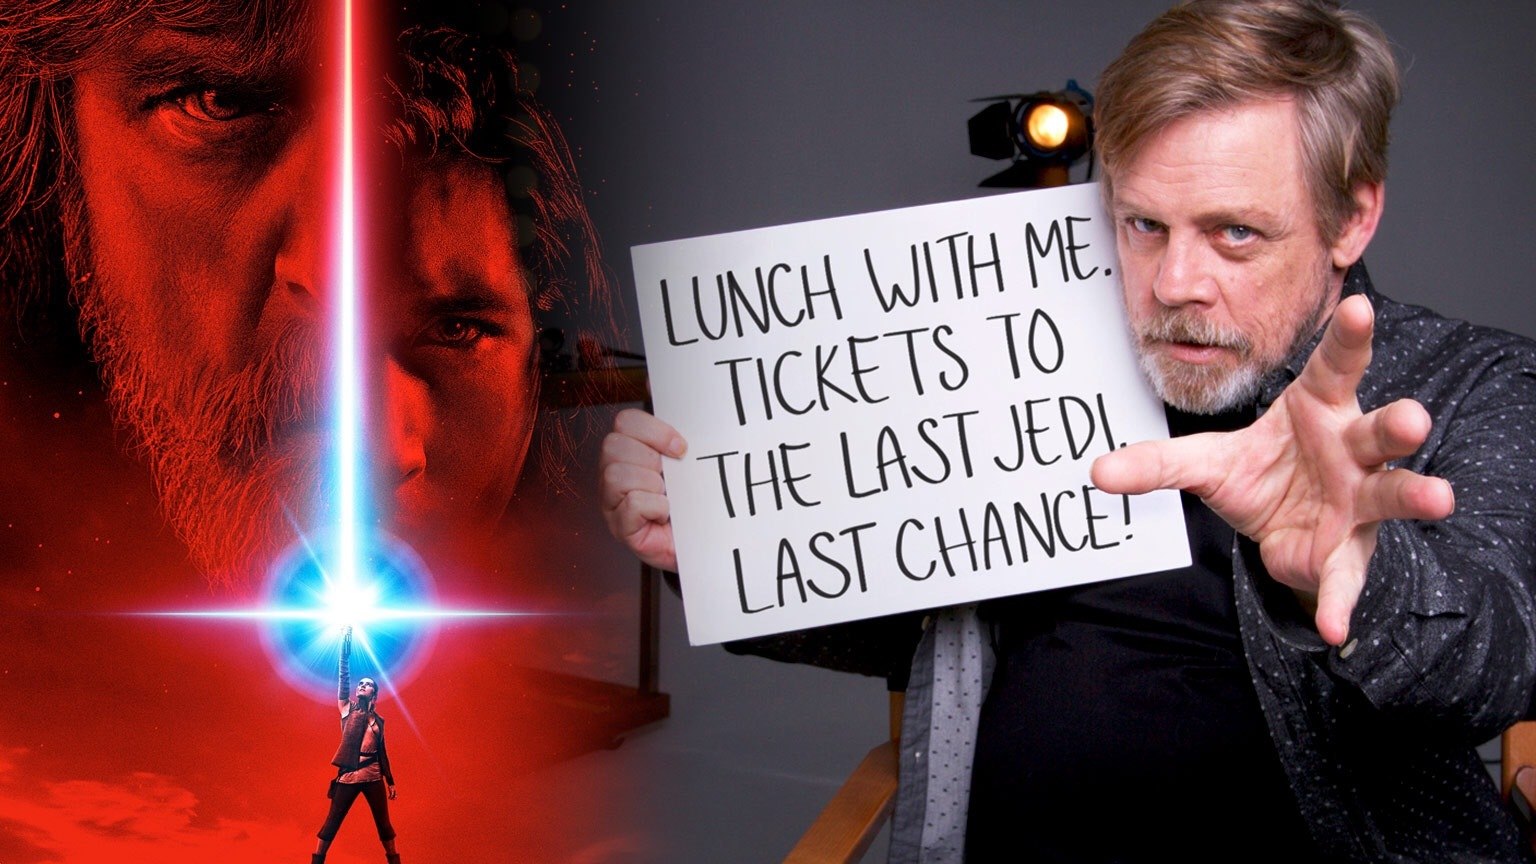 Watch Mark Hamill Surprise Fans on behalf of Star Wars: Force for Change